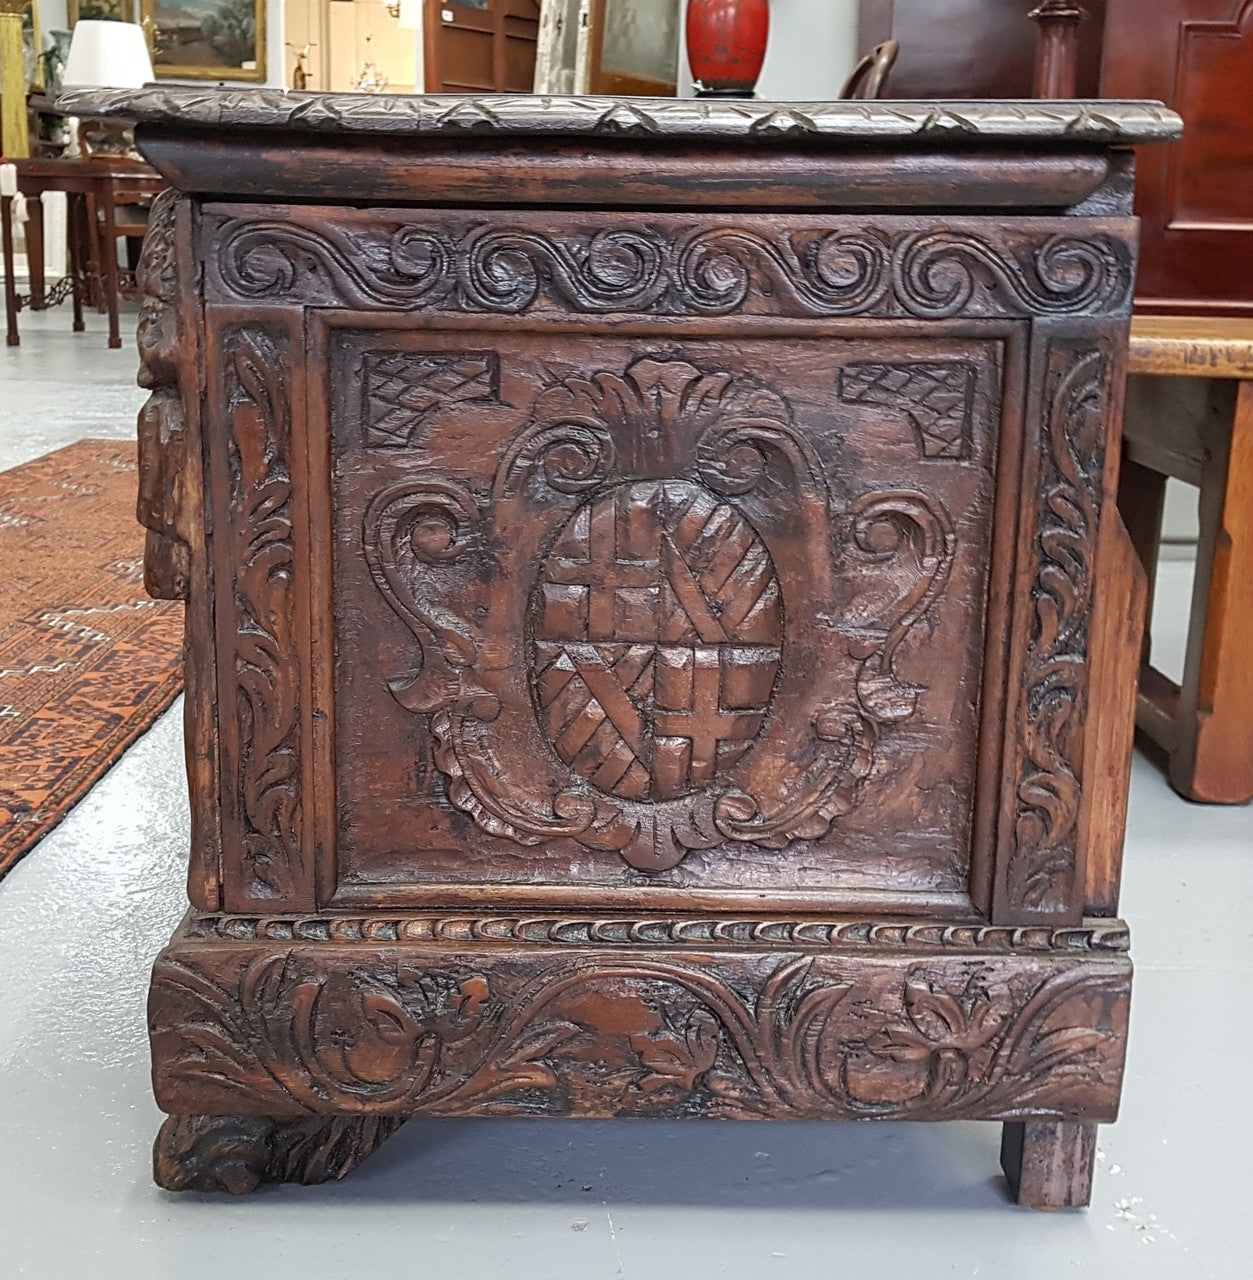 Antique Mahogany Heavily Carved Coffer Chest Blanket Box